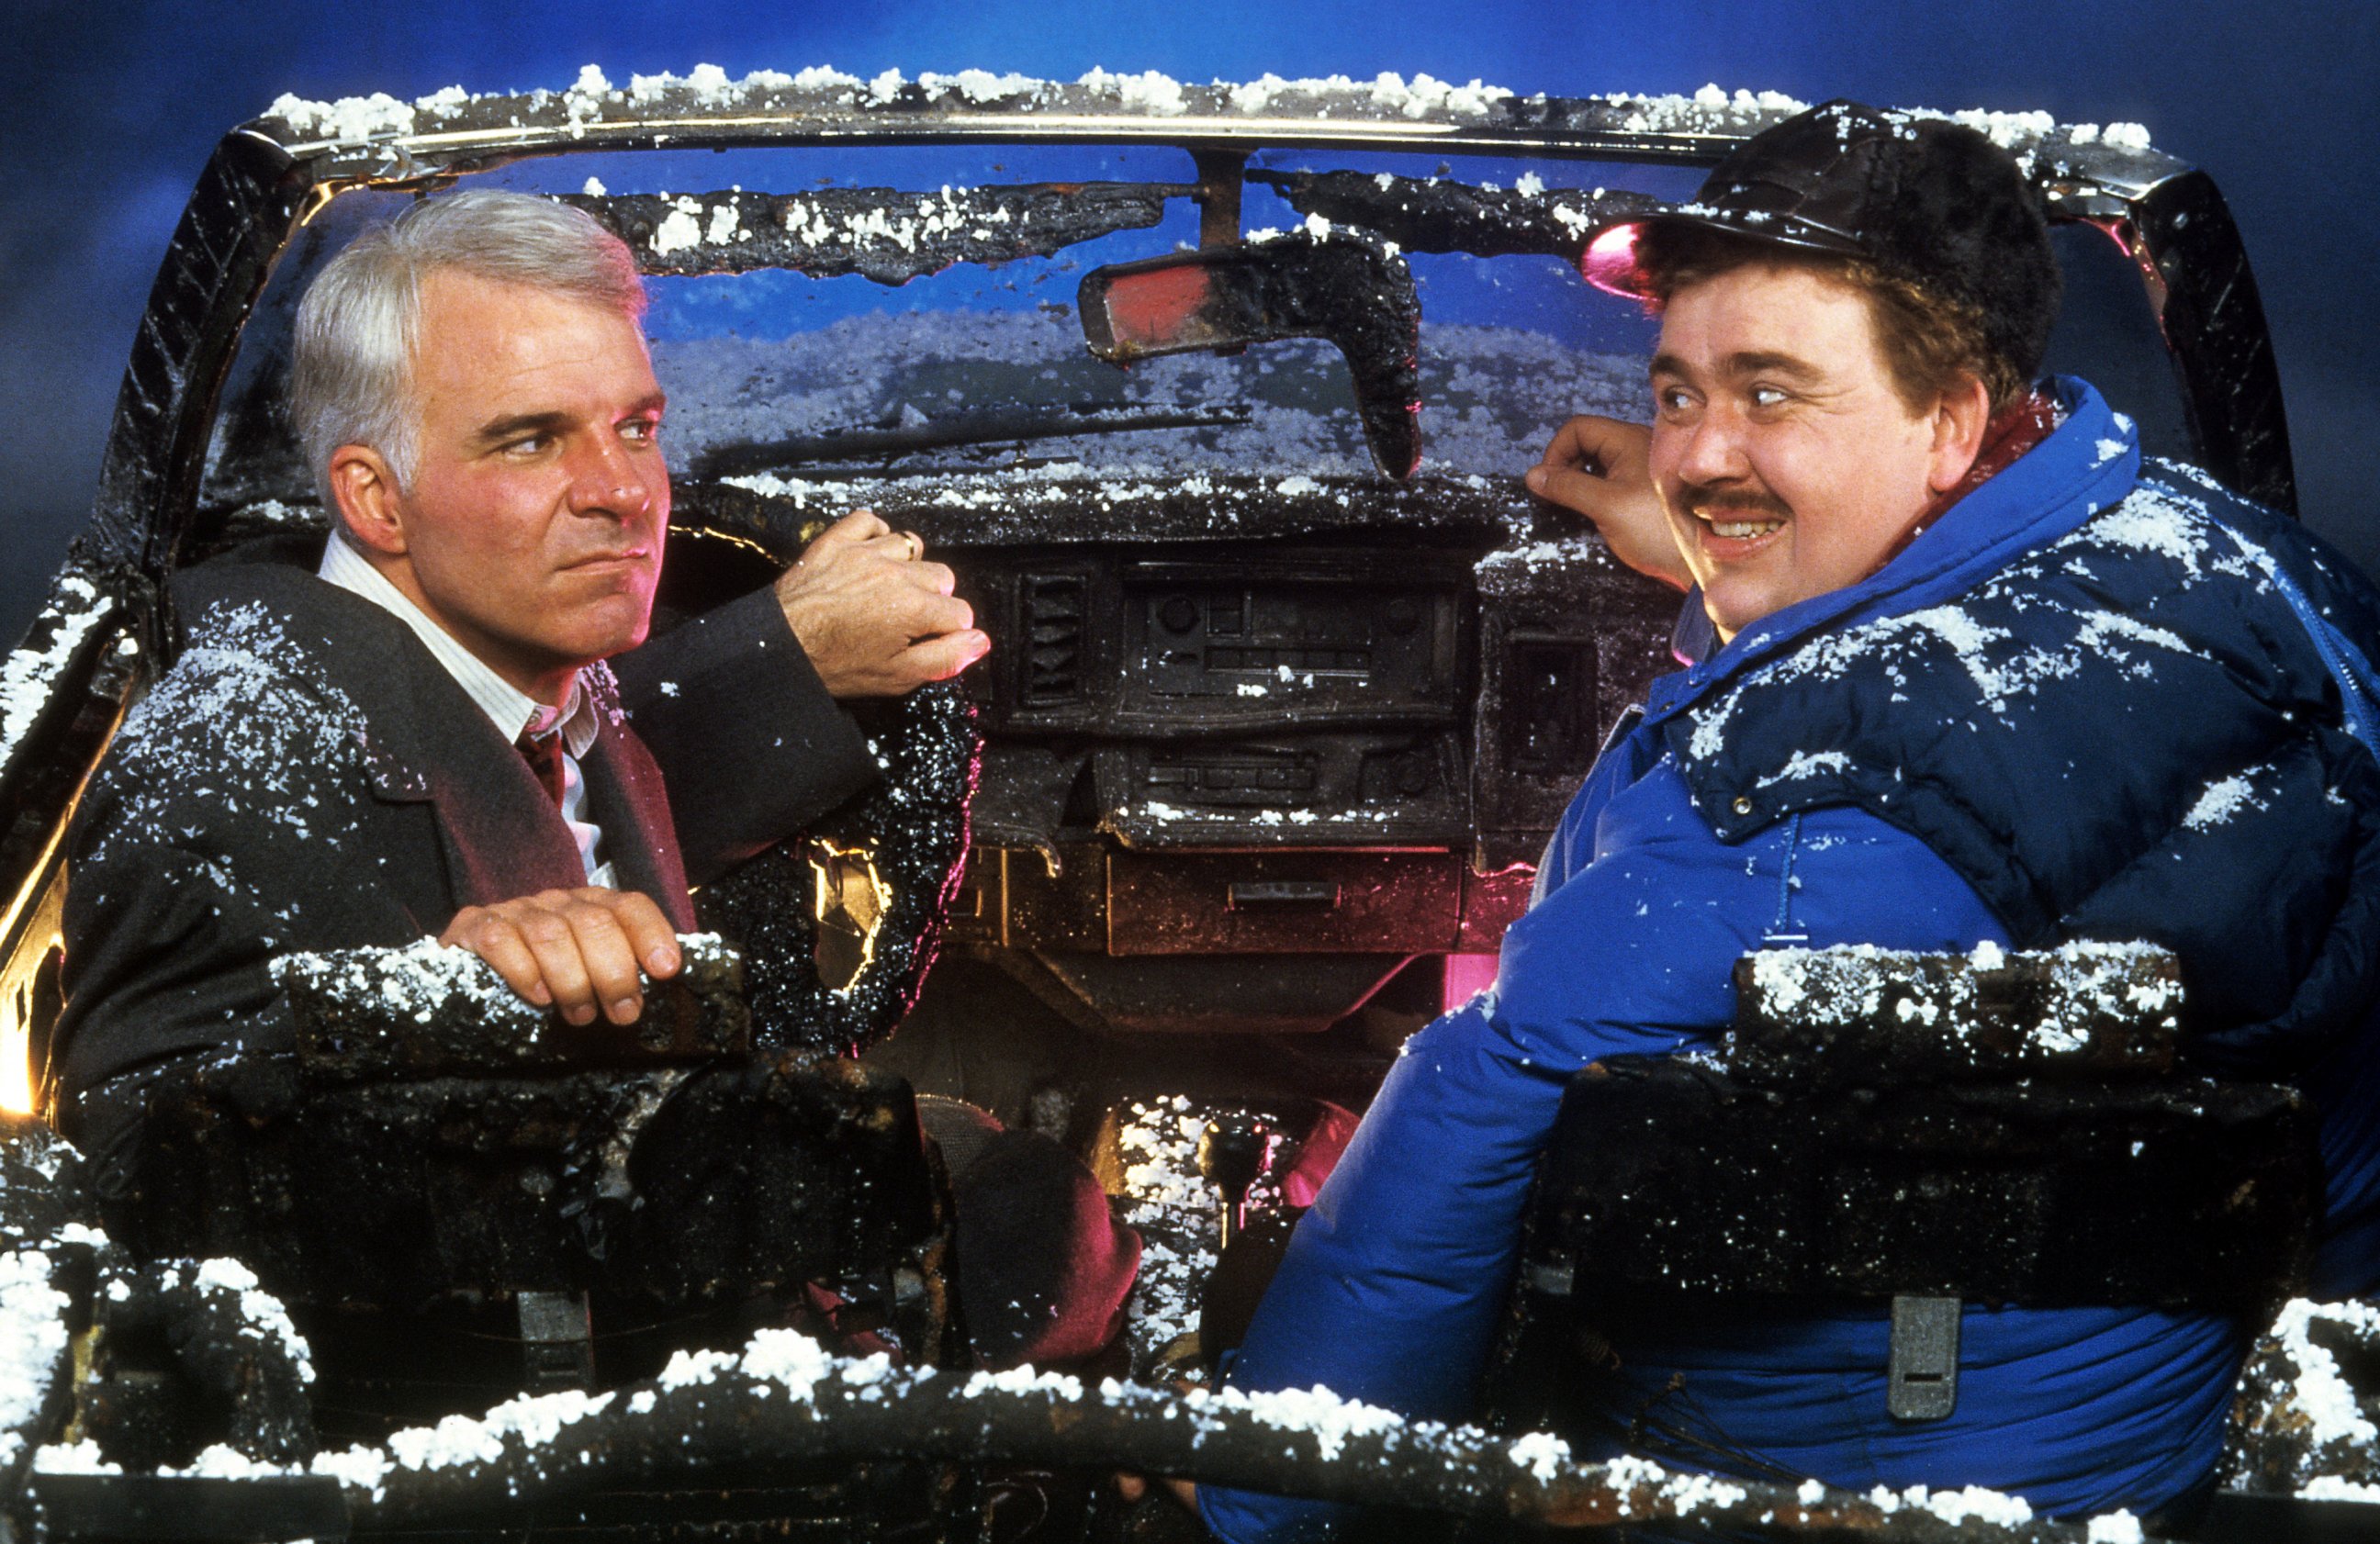 PHOTO: Steve Martin and John Candy sit in a destroyed car in a scene from the film 'Planes, Trains & Automobiles', 1987. 